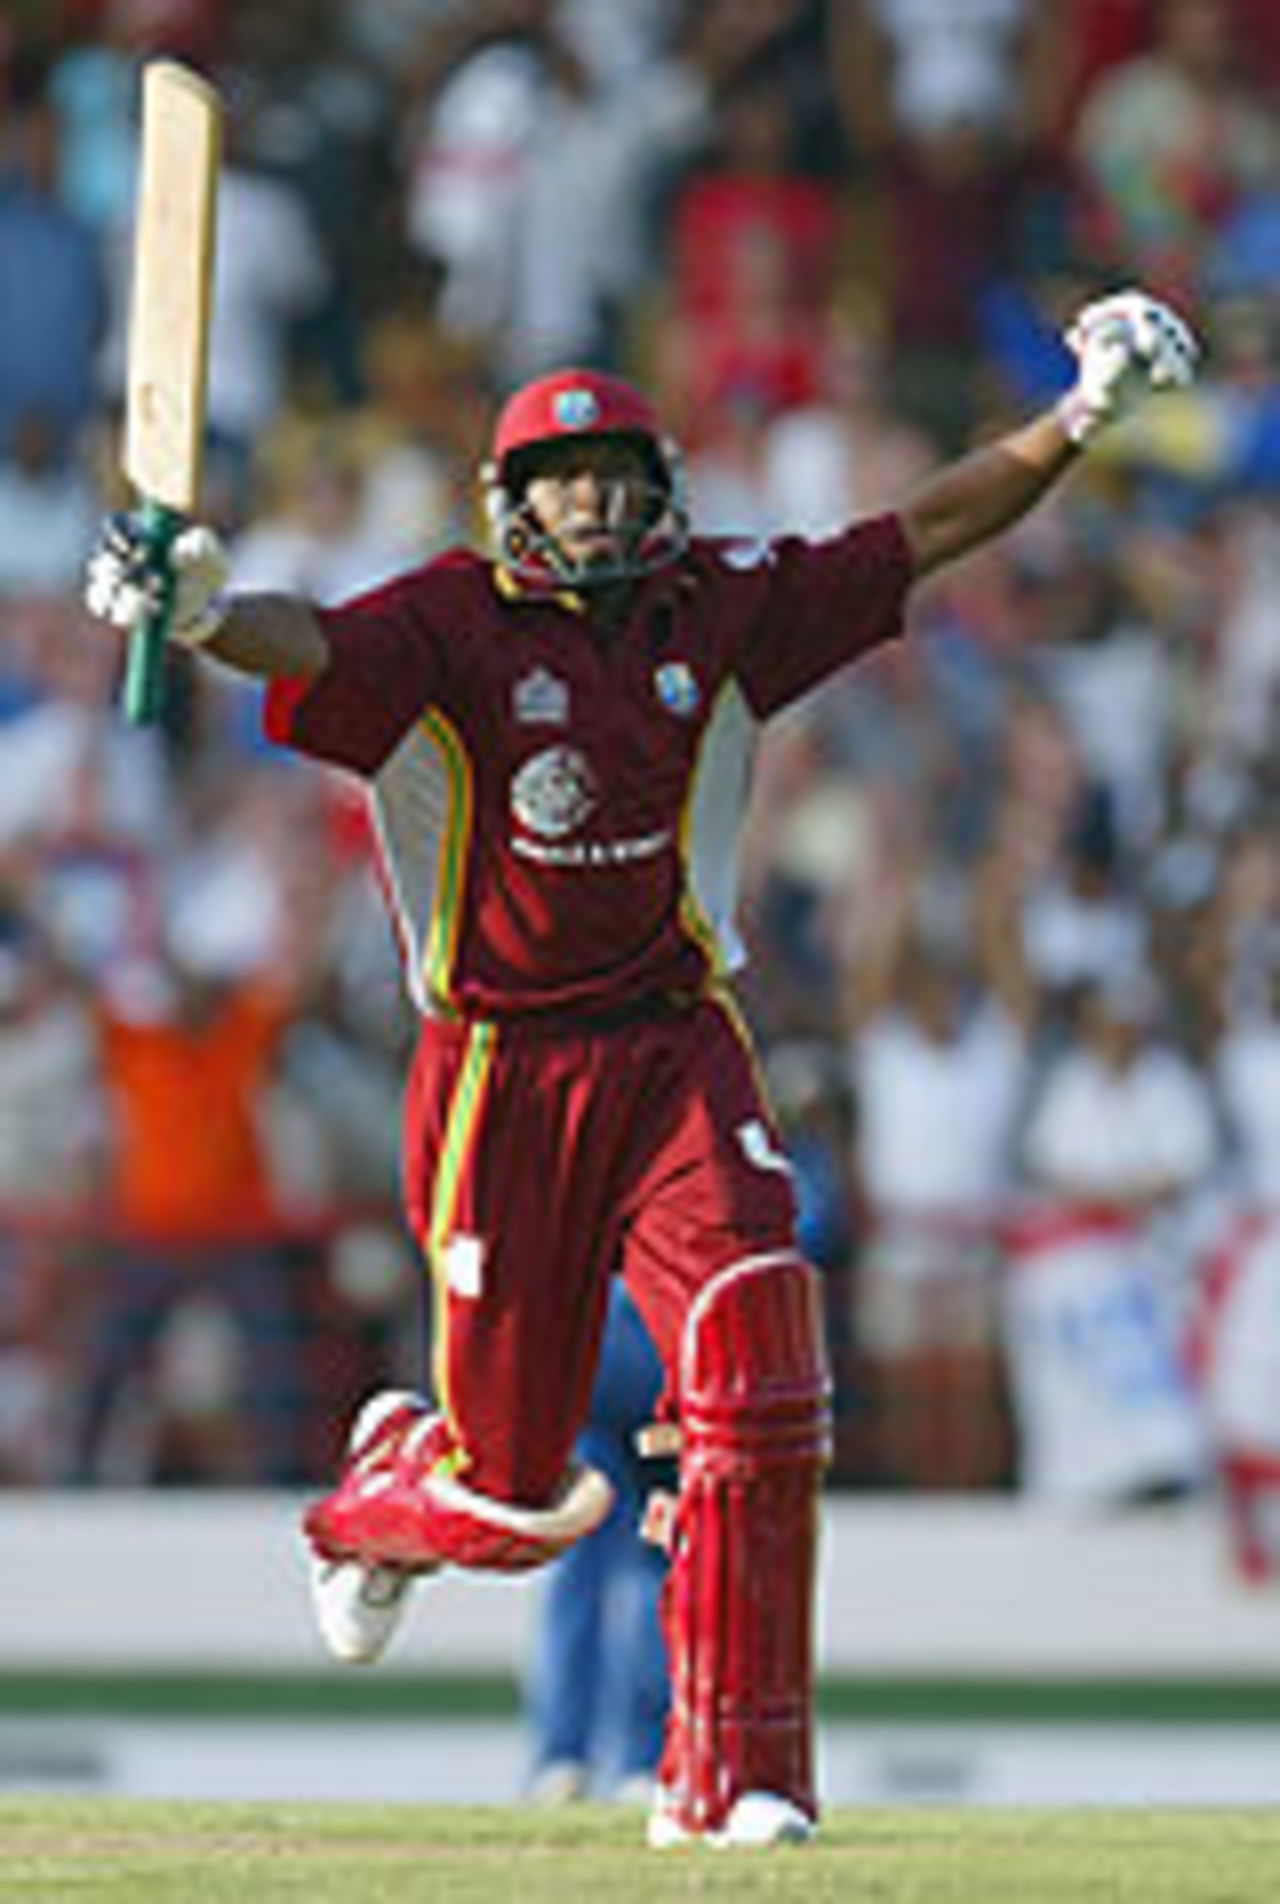 Dwayne Bravo raises his arms after winning a game for West Indies